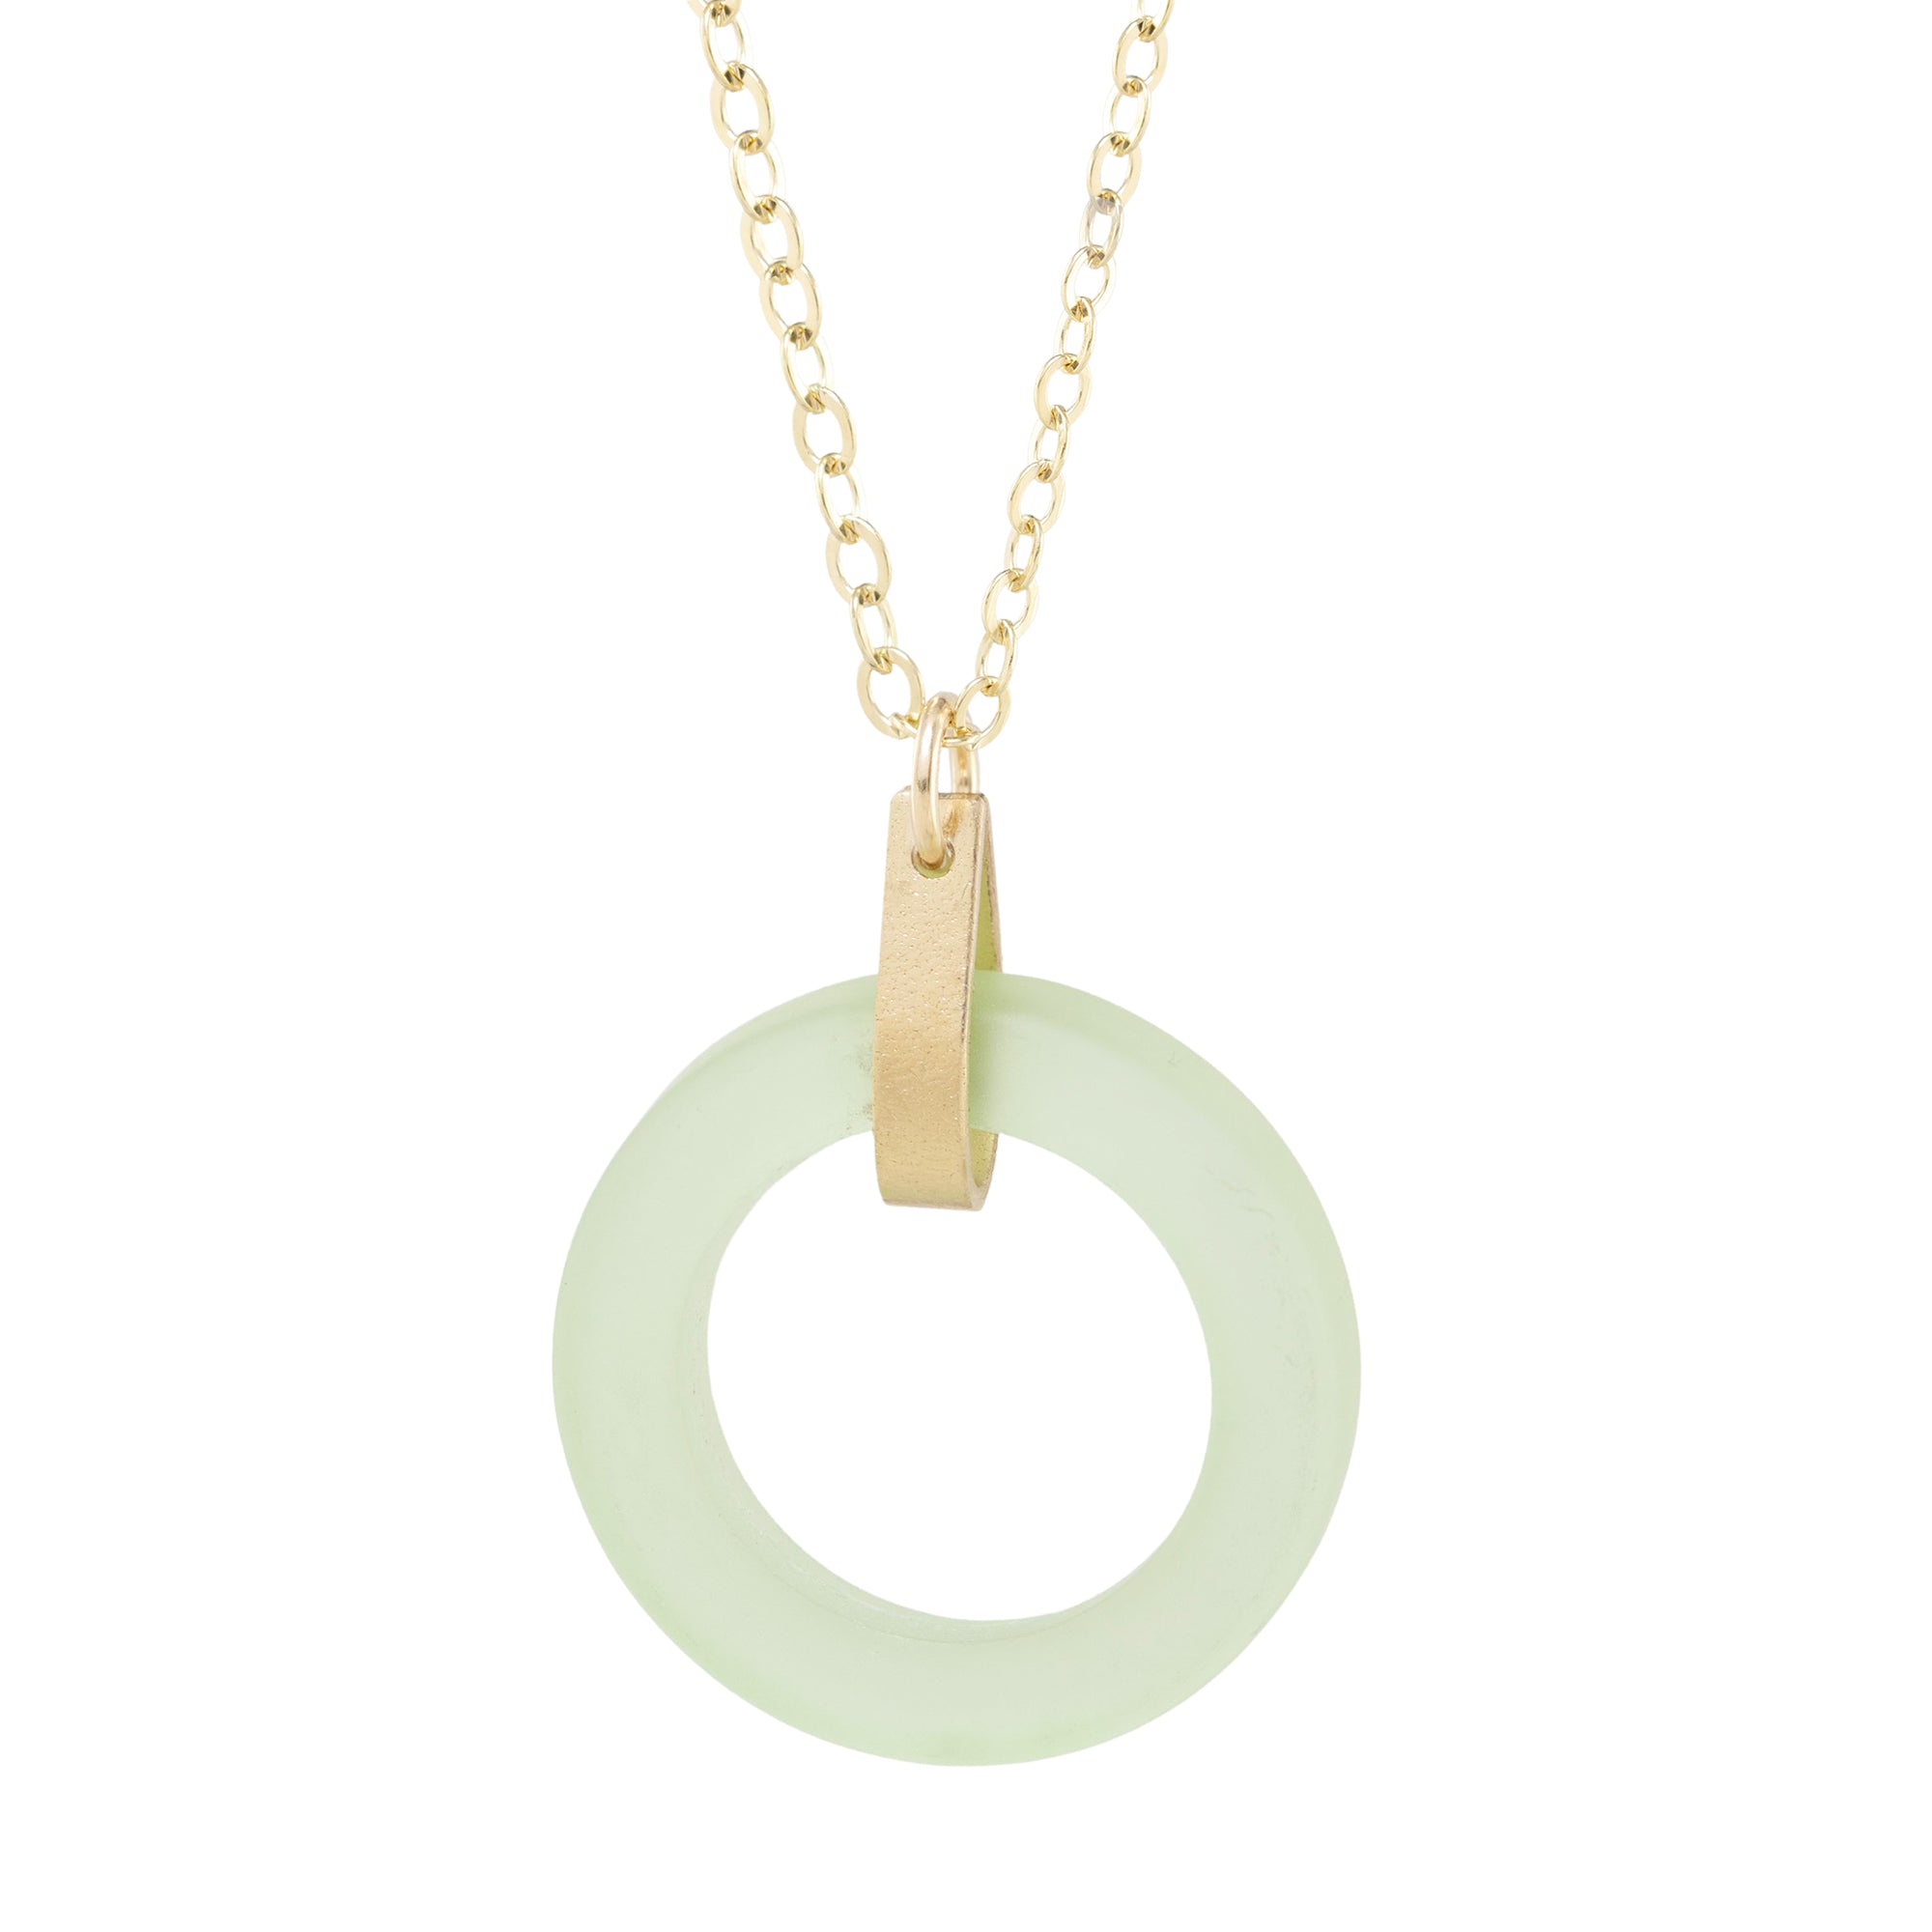 Light Pastel Sage Green Round Recycled Glass Open Circle and 14K Gold Fill Strap Style Pendant Necklace